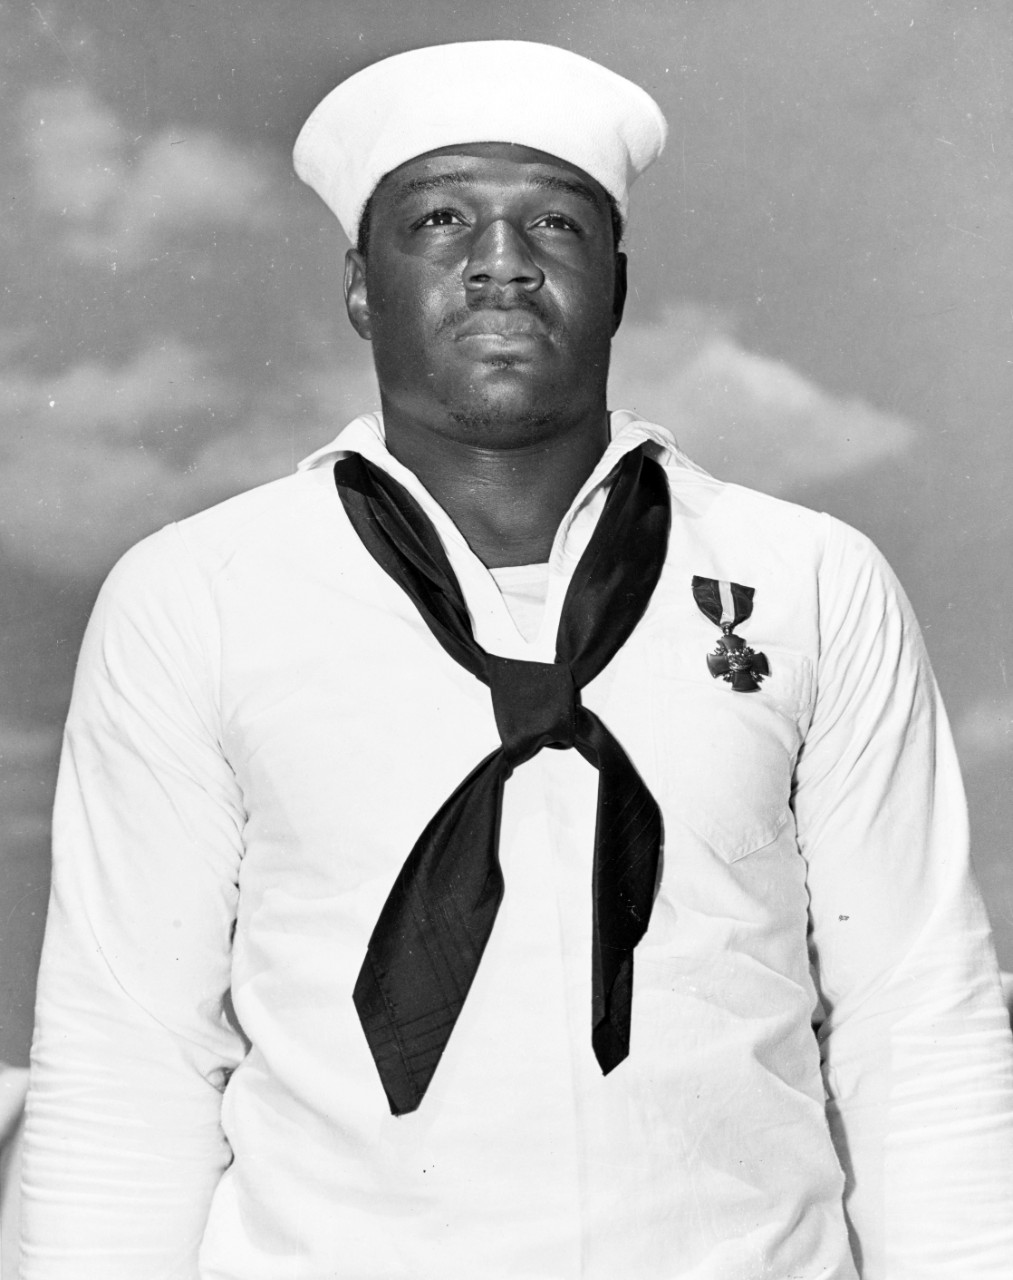 Mess Attendant Second Class Doris Miller just after being presented with the Navy Cross by Admiral Chester W. Nimitz on board the aircraft carrier Enterprise (CV-6) at Pearl Harbor, 27 May 1942. Official U.S. Navy Photograph, now in the collections of the National Archives (NHHC 80-G-408456).